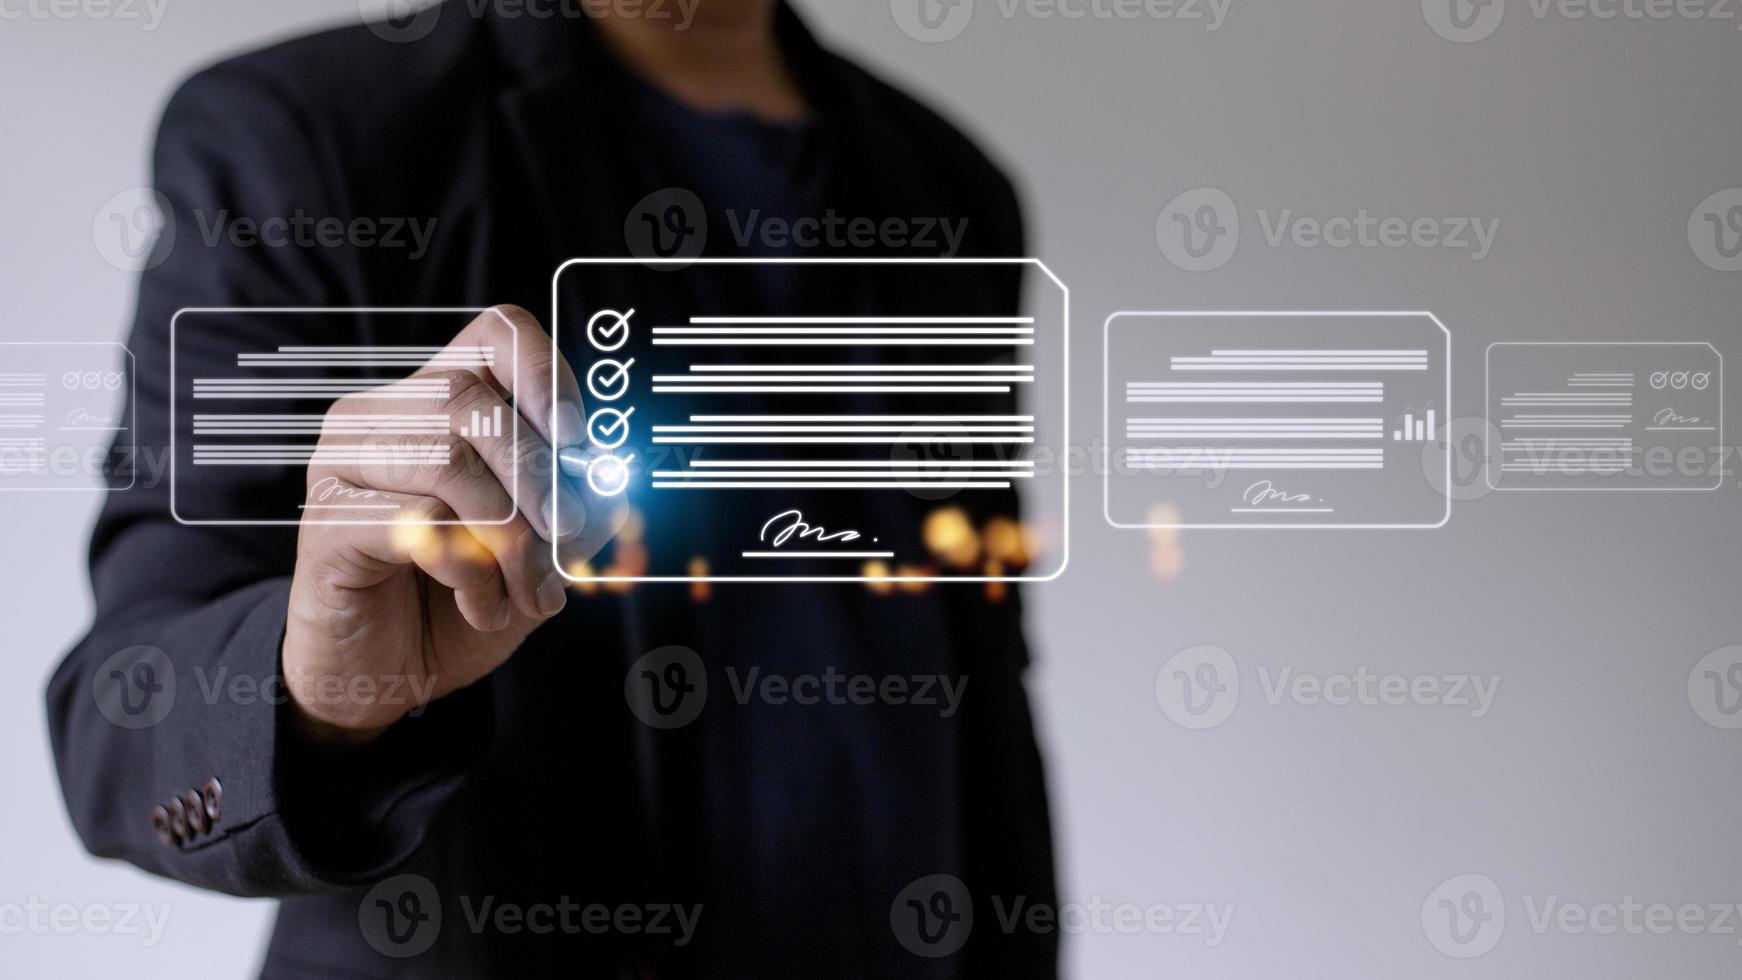 Paperless workplace ideas, e-signing, electronic signature, document management. A businessman signs an electronic document on a digital document on a virtual screen using a stylus pen. photo